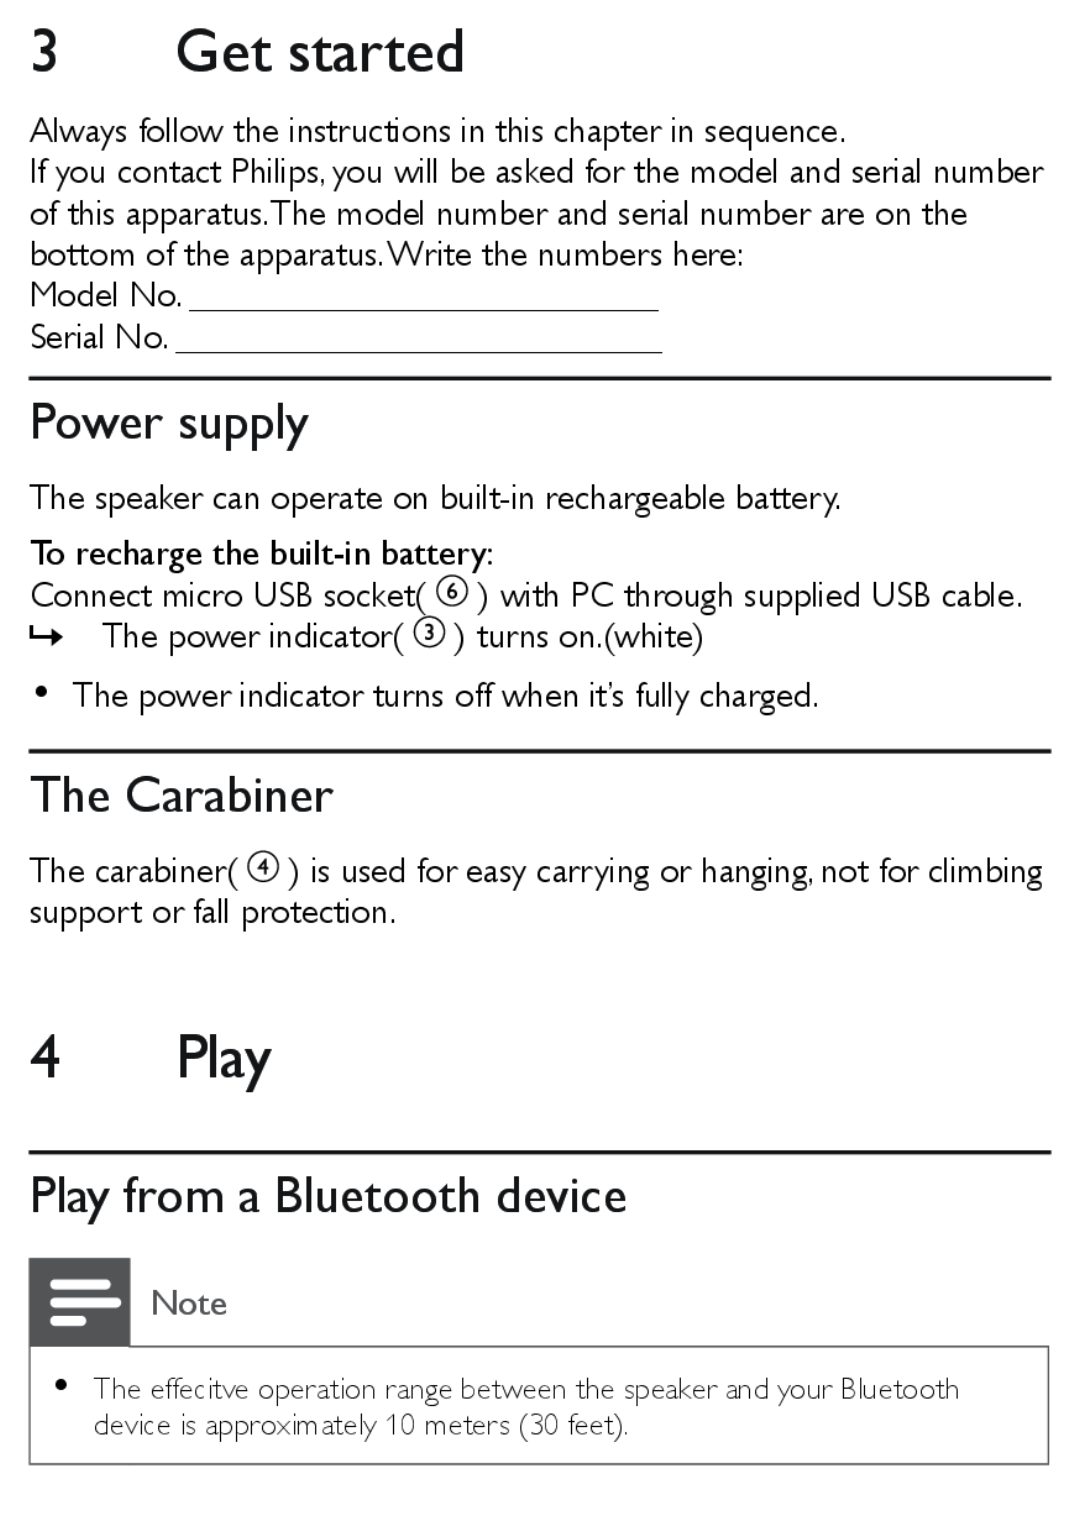 Philips SBT30 user manual Get started, Power supply, The Carabiner, Play from a Bluetooth device 